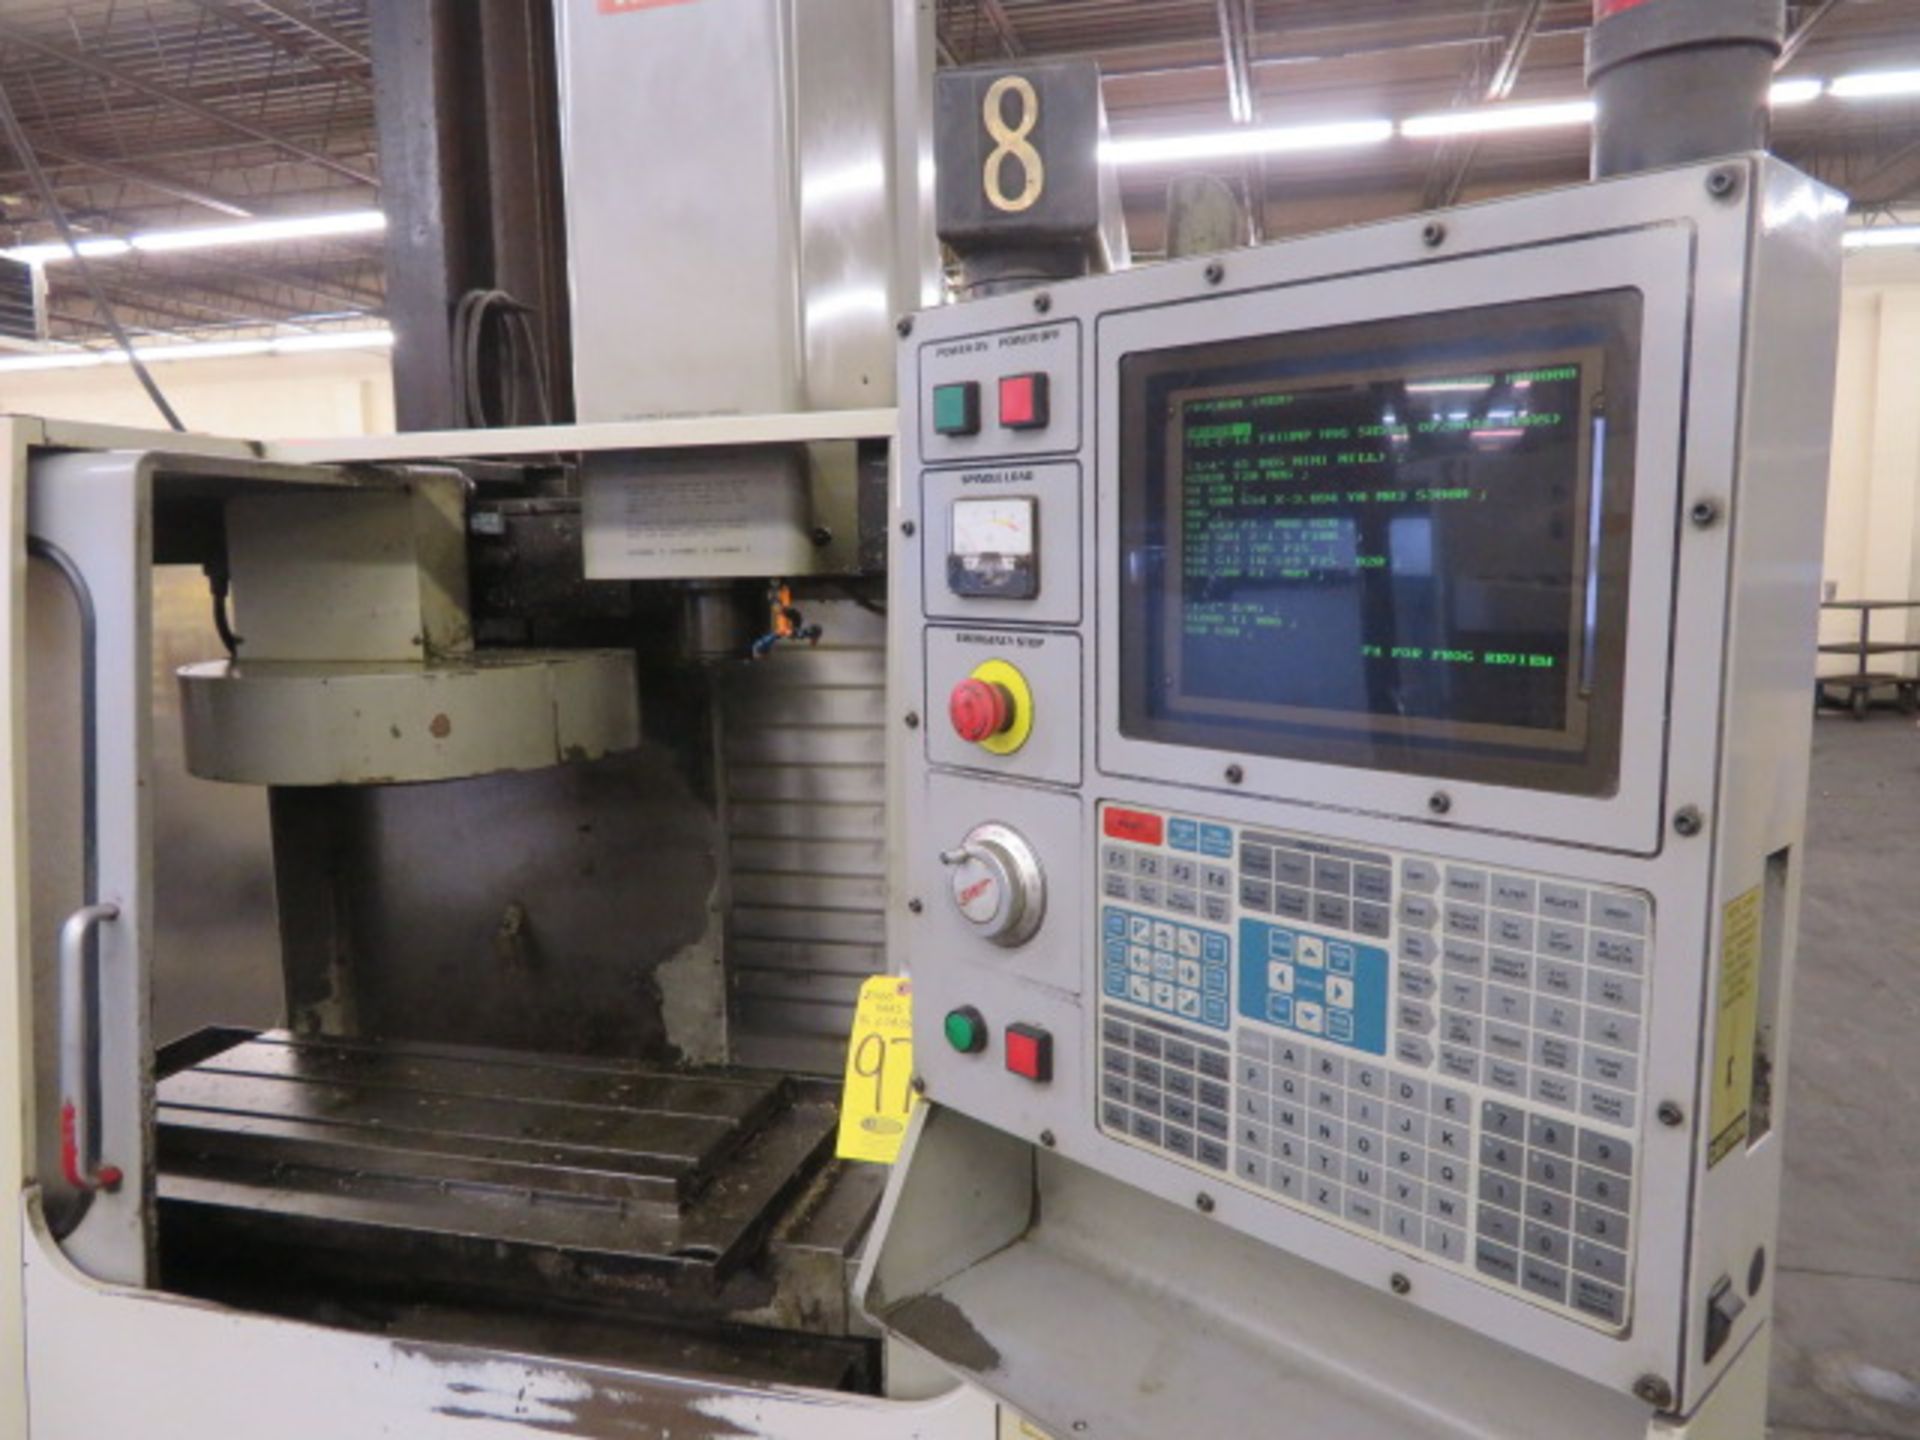 2000 HAAS VF-2 CNC Vertical Machining Center, S/N 20835, HAAS CNC Control, 4TH AXIS ENABLED - Image 4 of 6